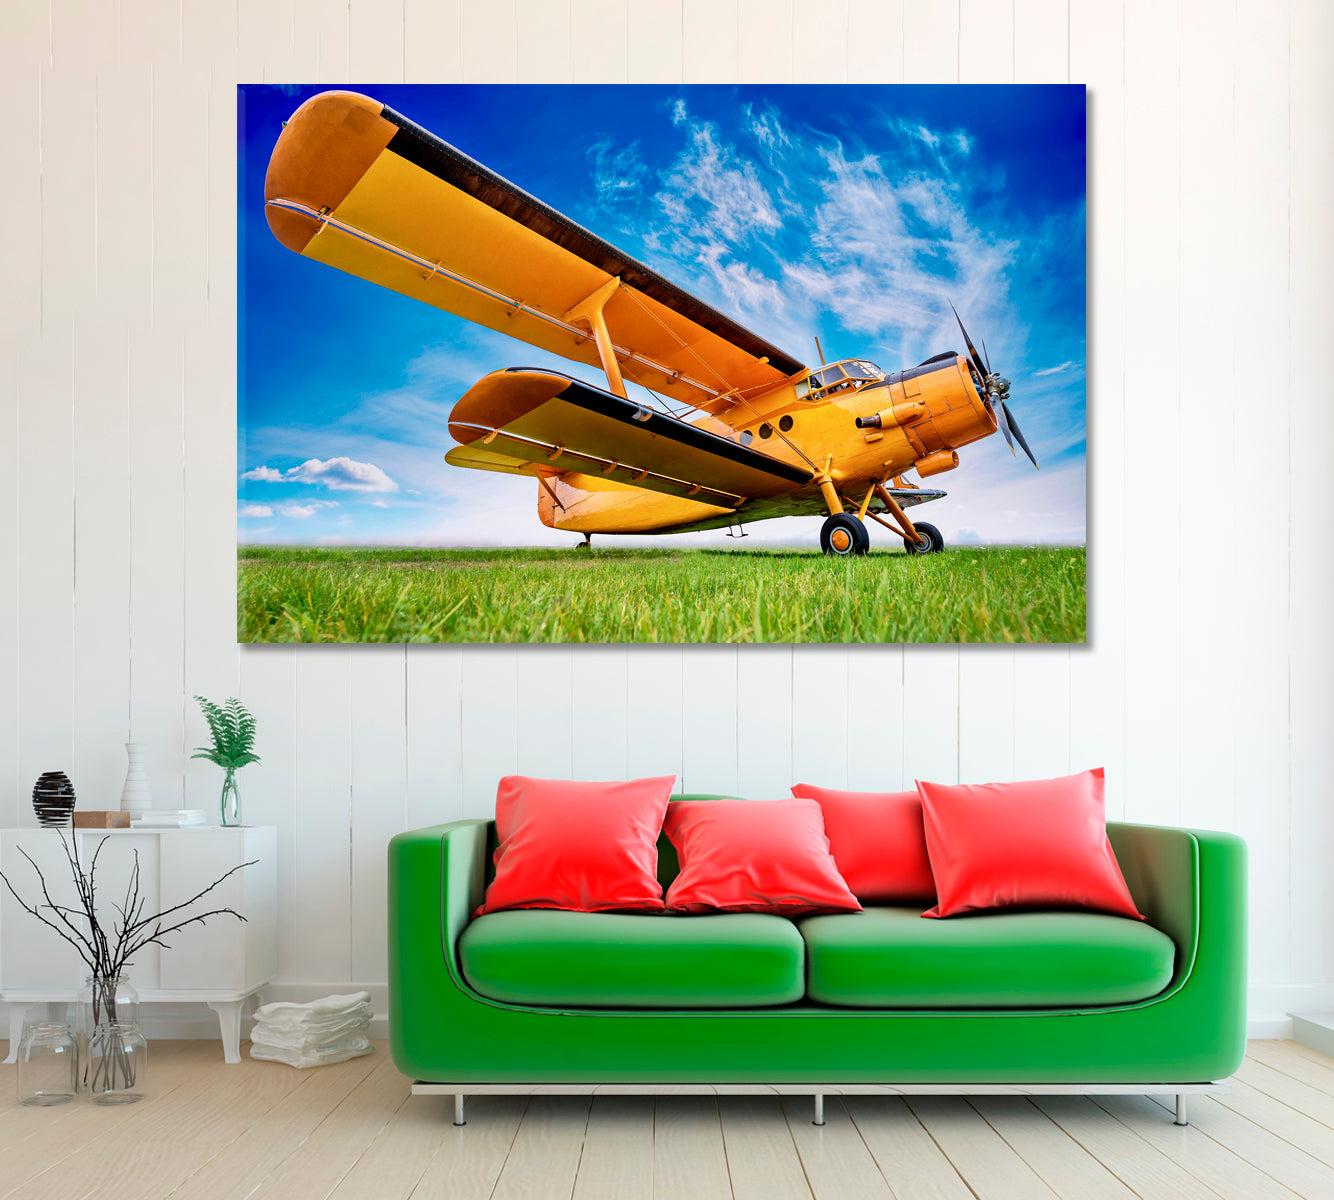 Old Yellow Biplane with Blue Sky Canvas Print ArtLexy 1 Panel 24"x16" inches 